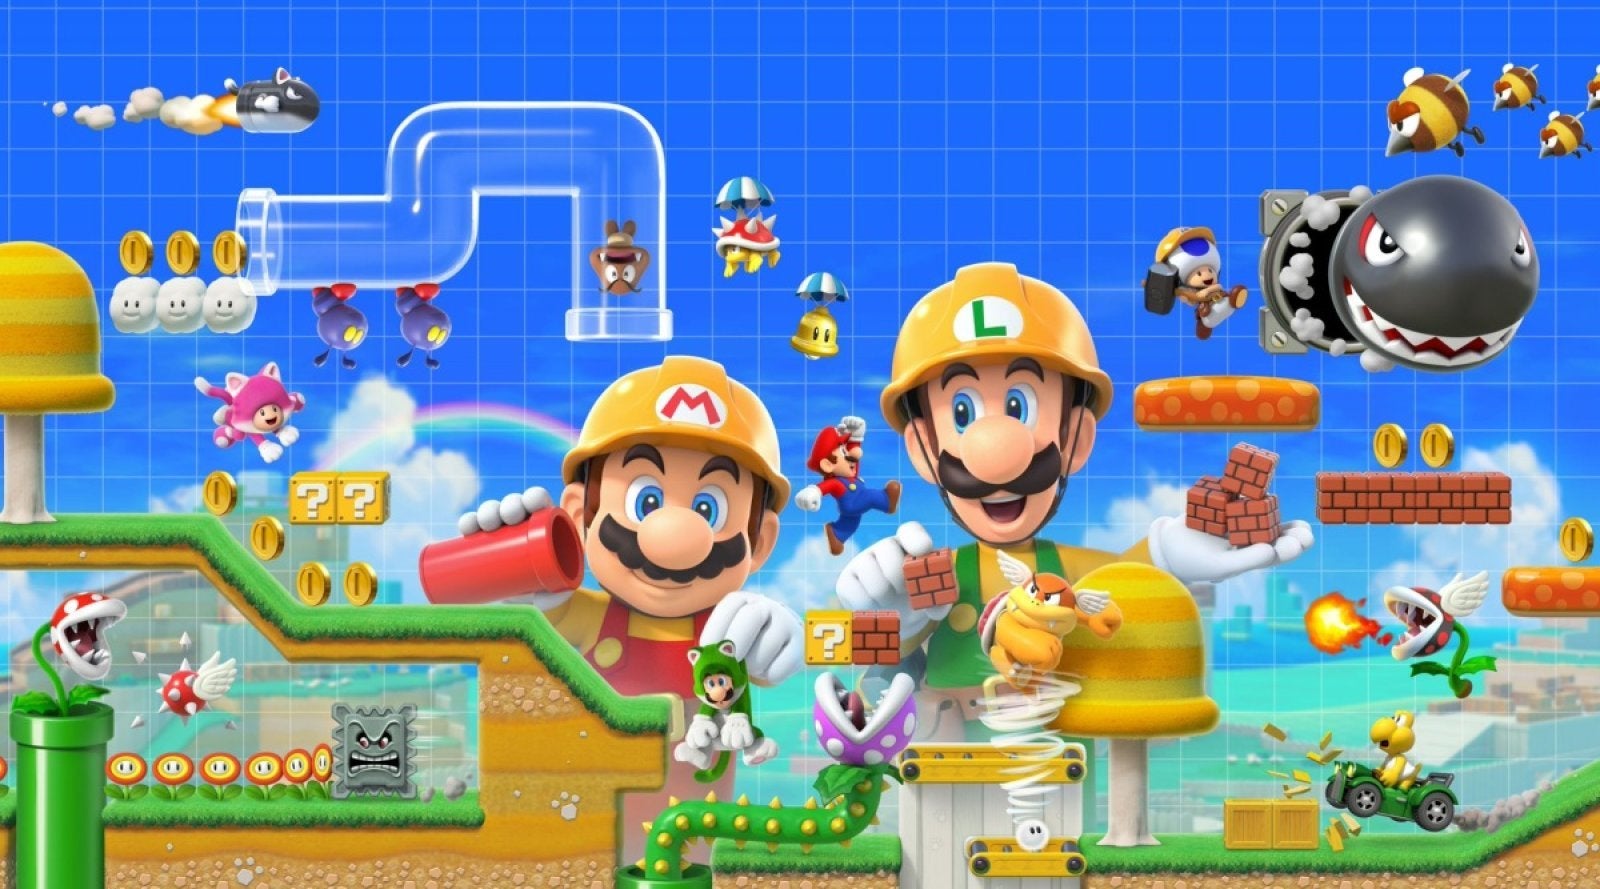 Image for Super Mario Maker 2 Direct Recap: story mode, night levels and more revealed